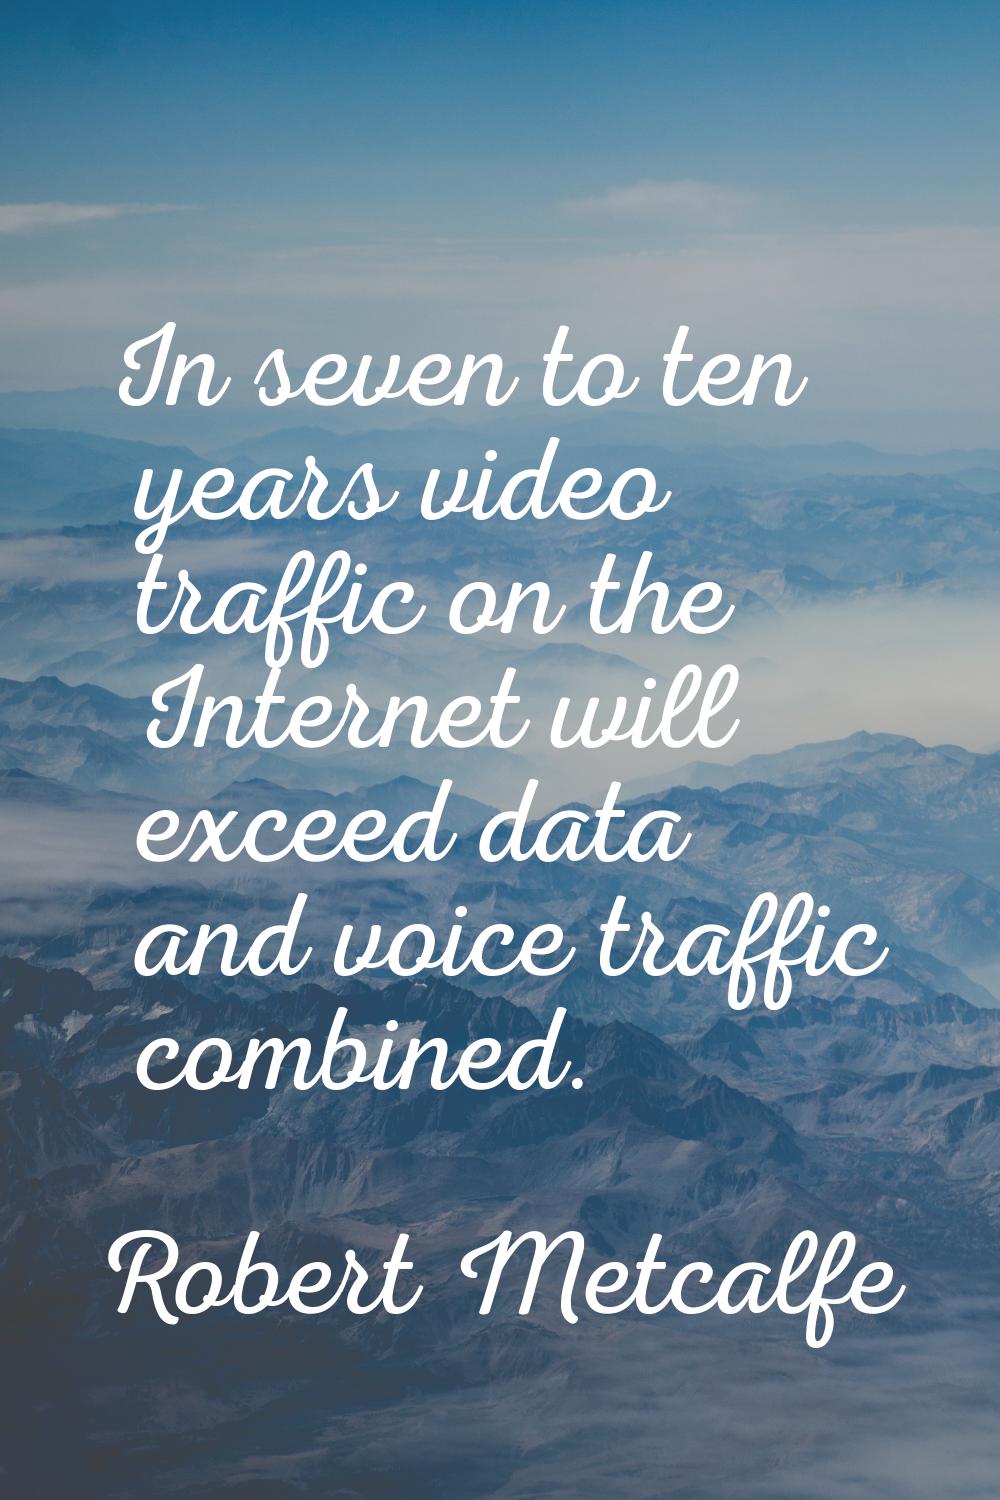 In seven to ten years video traffic on the Internet will exceed data and voice traffic combined.